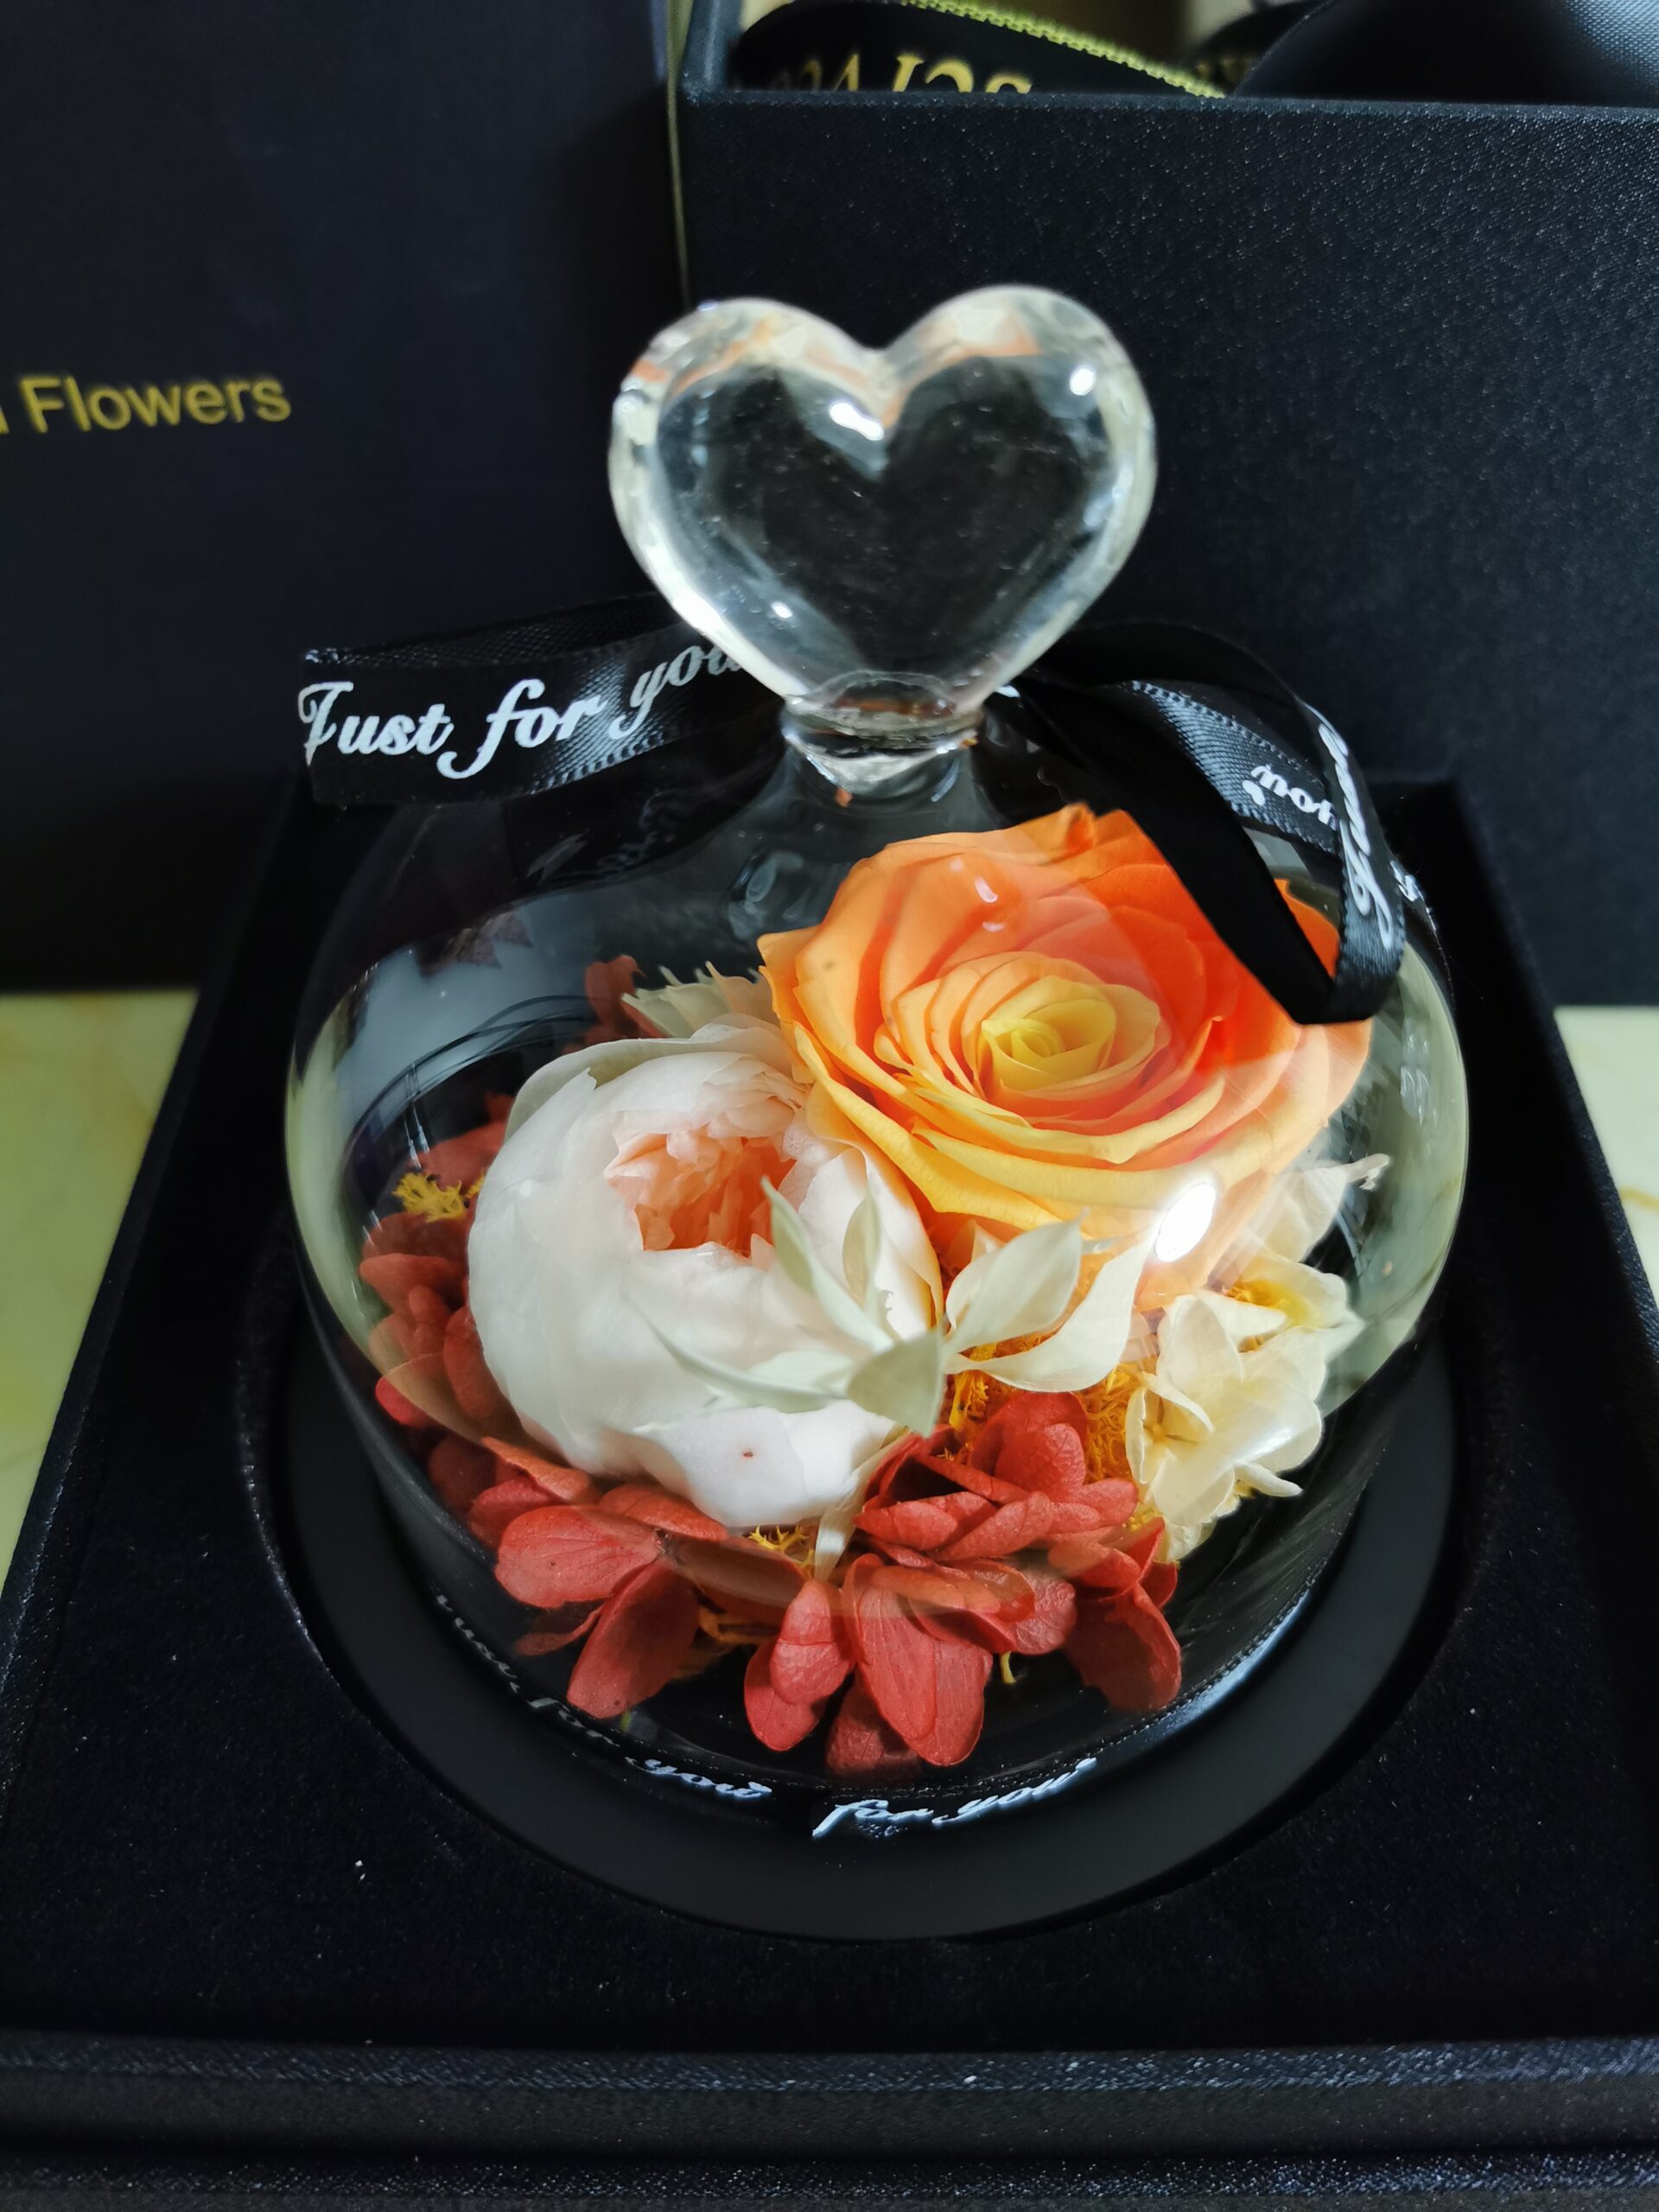 Beauty & The Beast - Real Eternal Rose in Glass Dome photo review